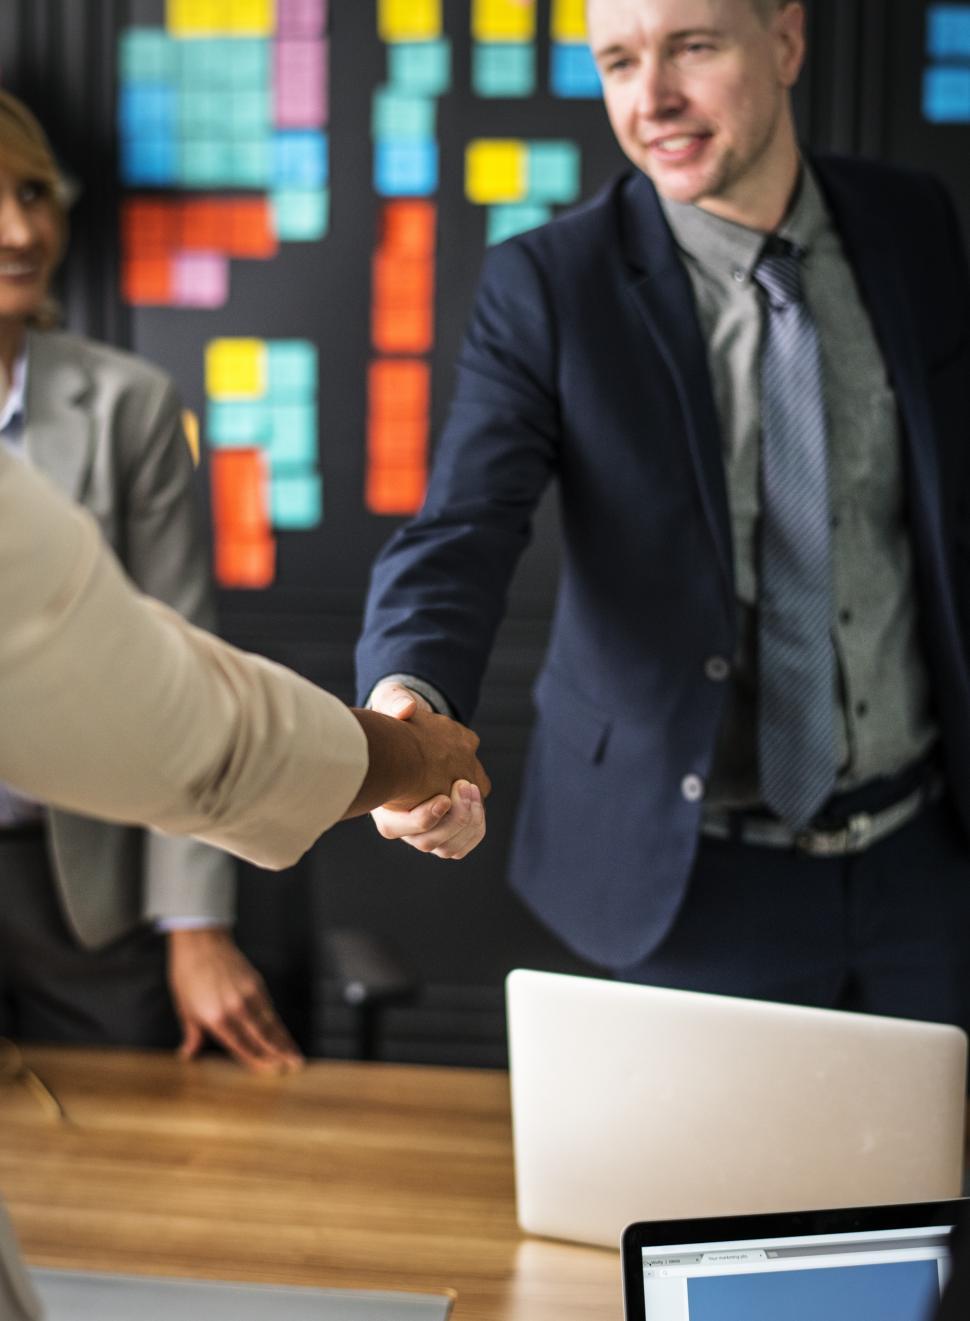 Free Image of Shaking hands after a meeting 